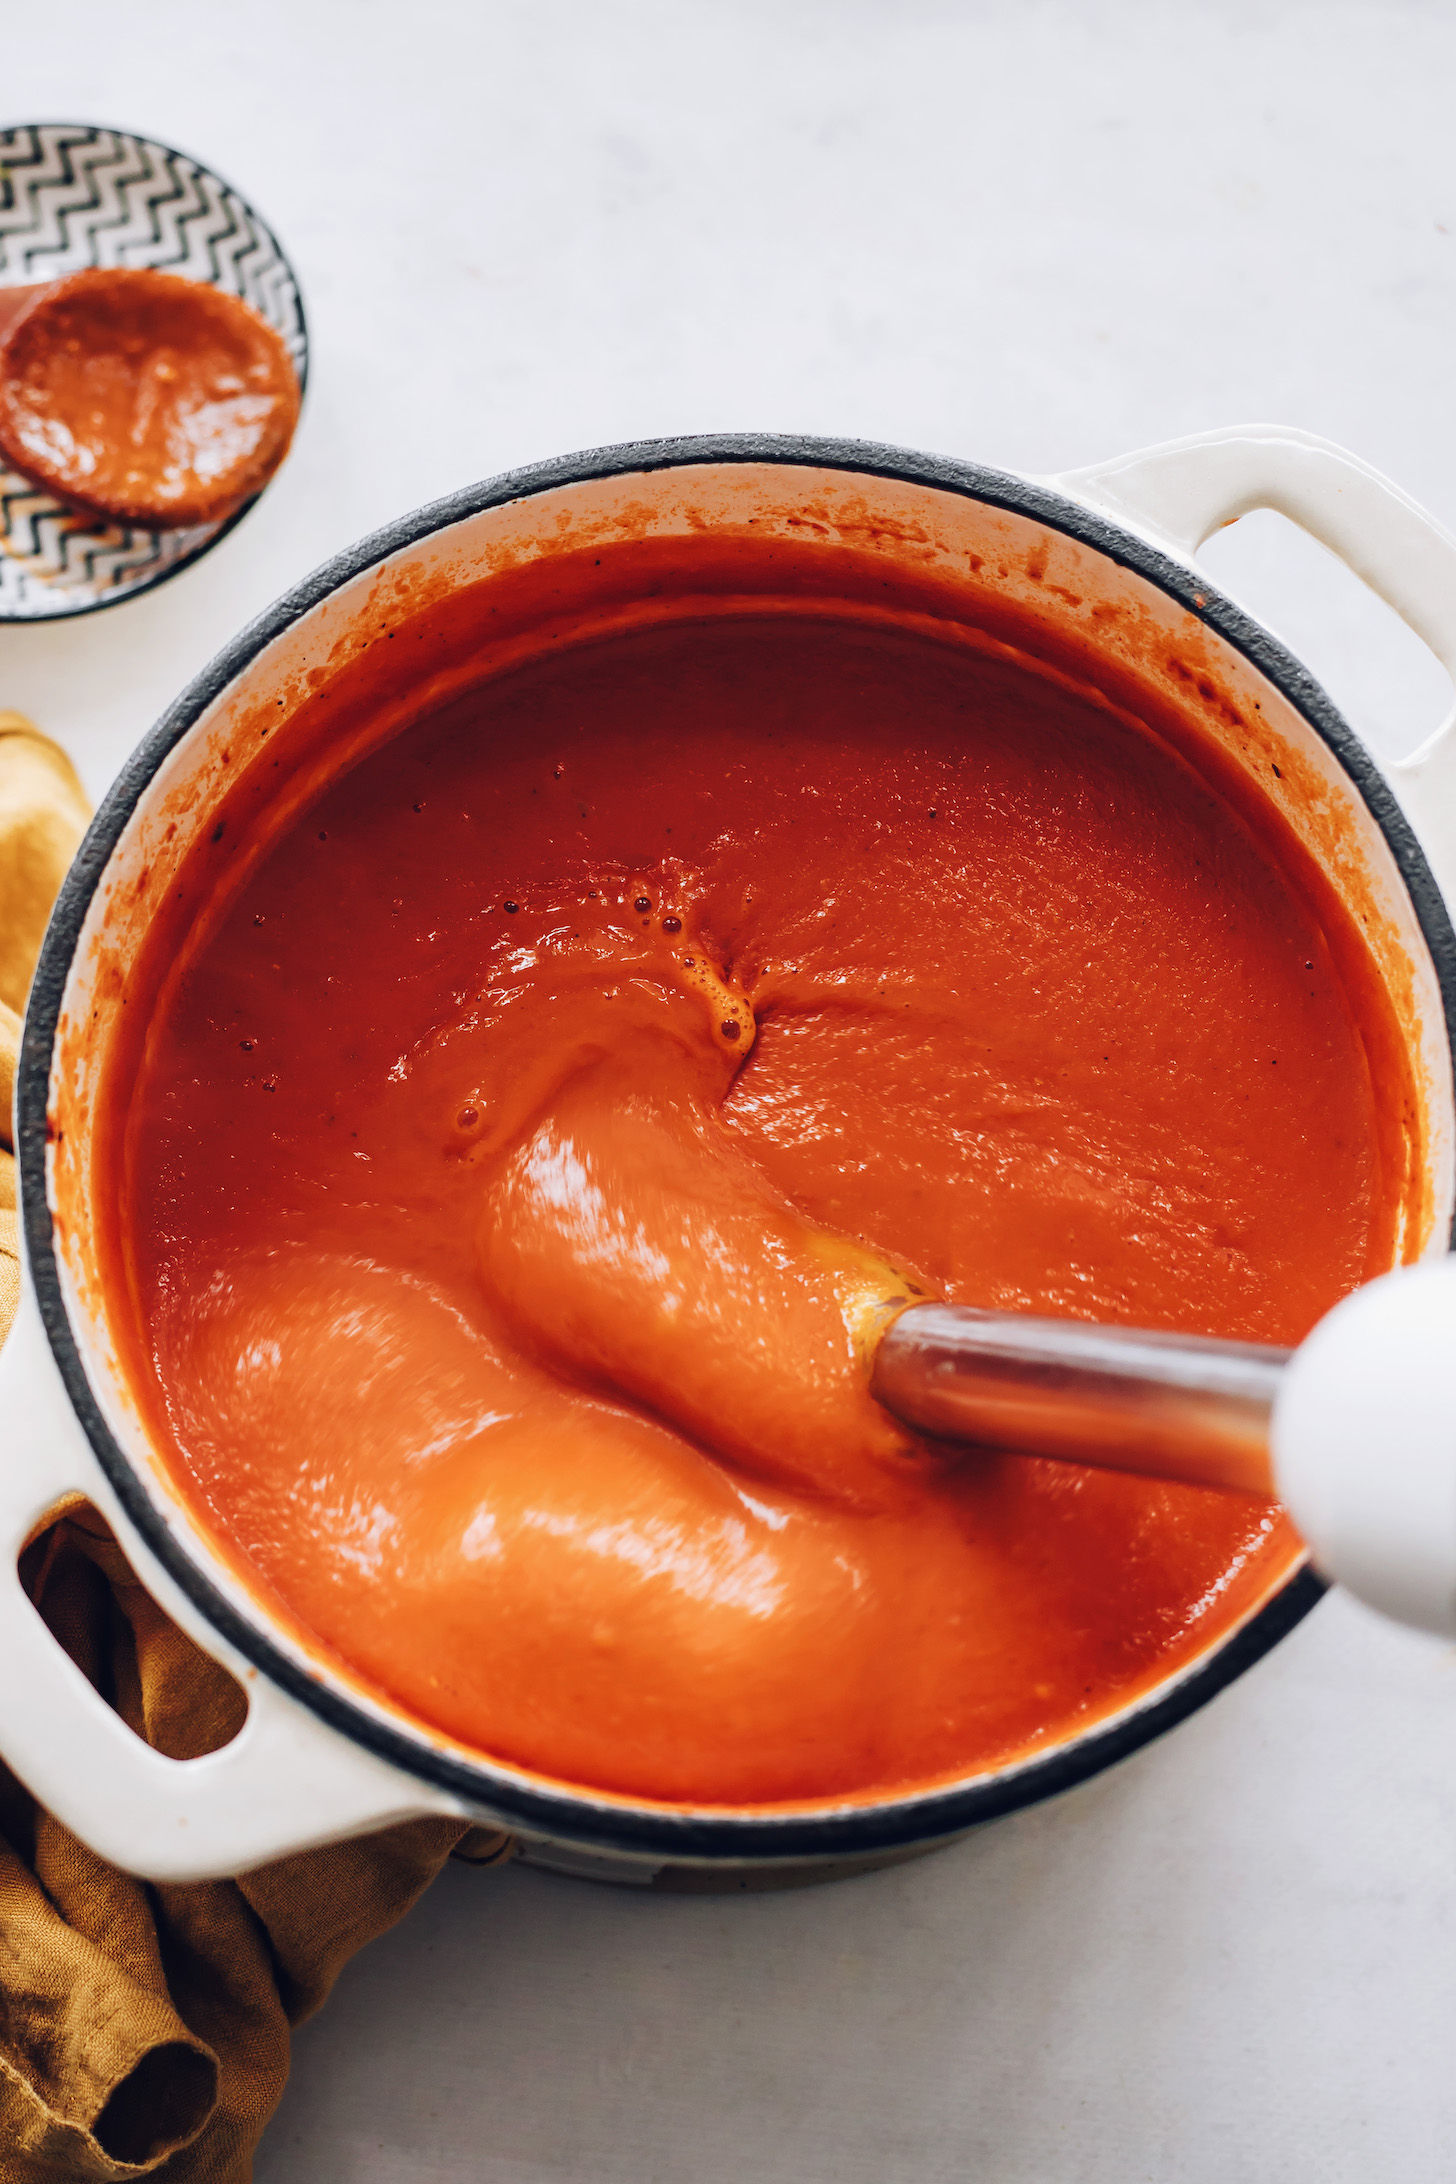 Using an immersion blender to make creamy tomato soup